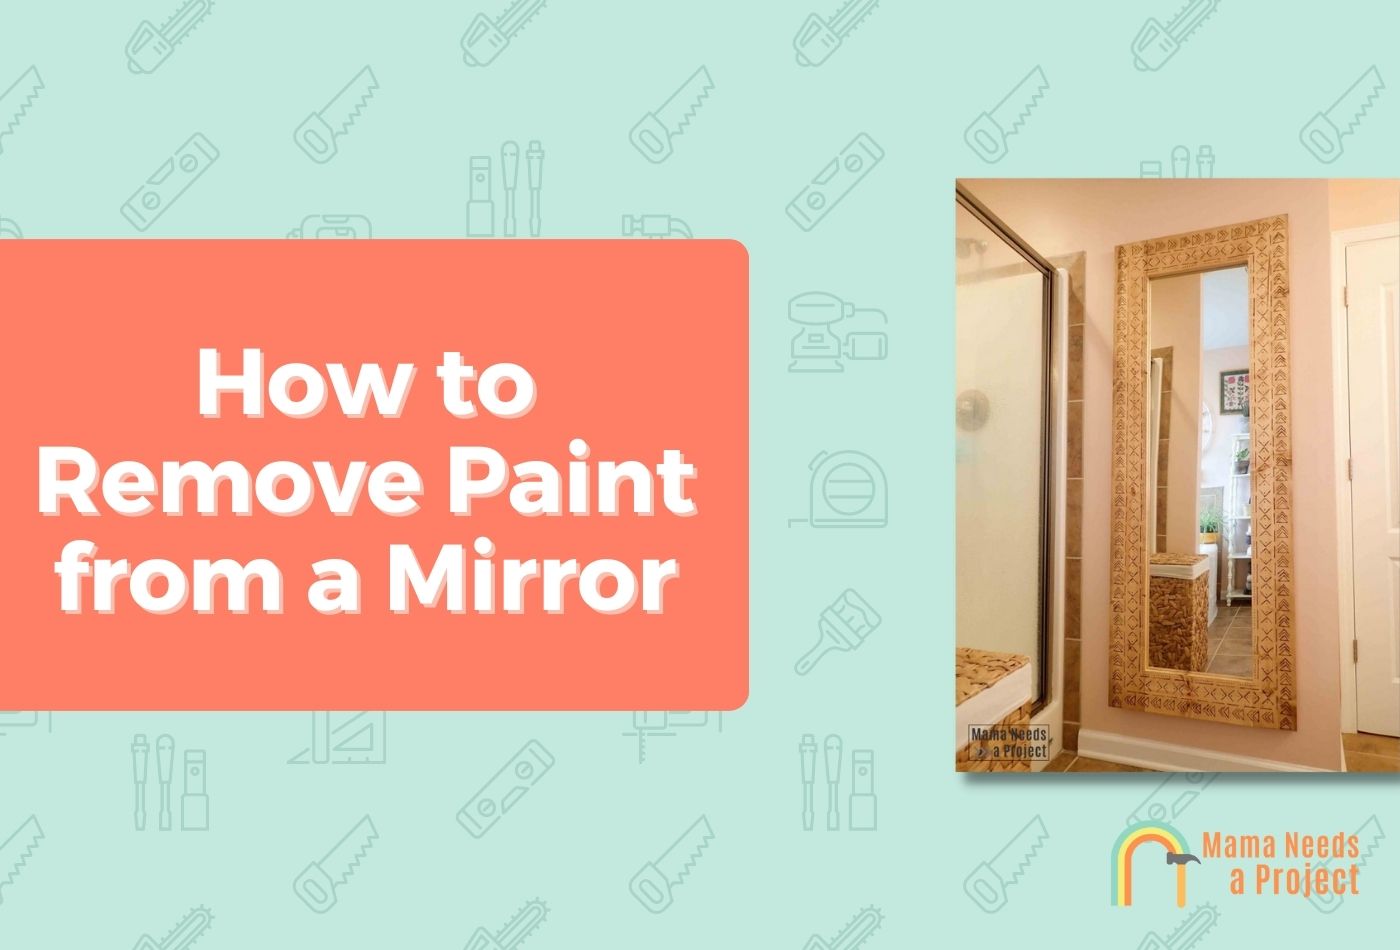 How to Remove Paint from a Mirror